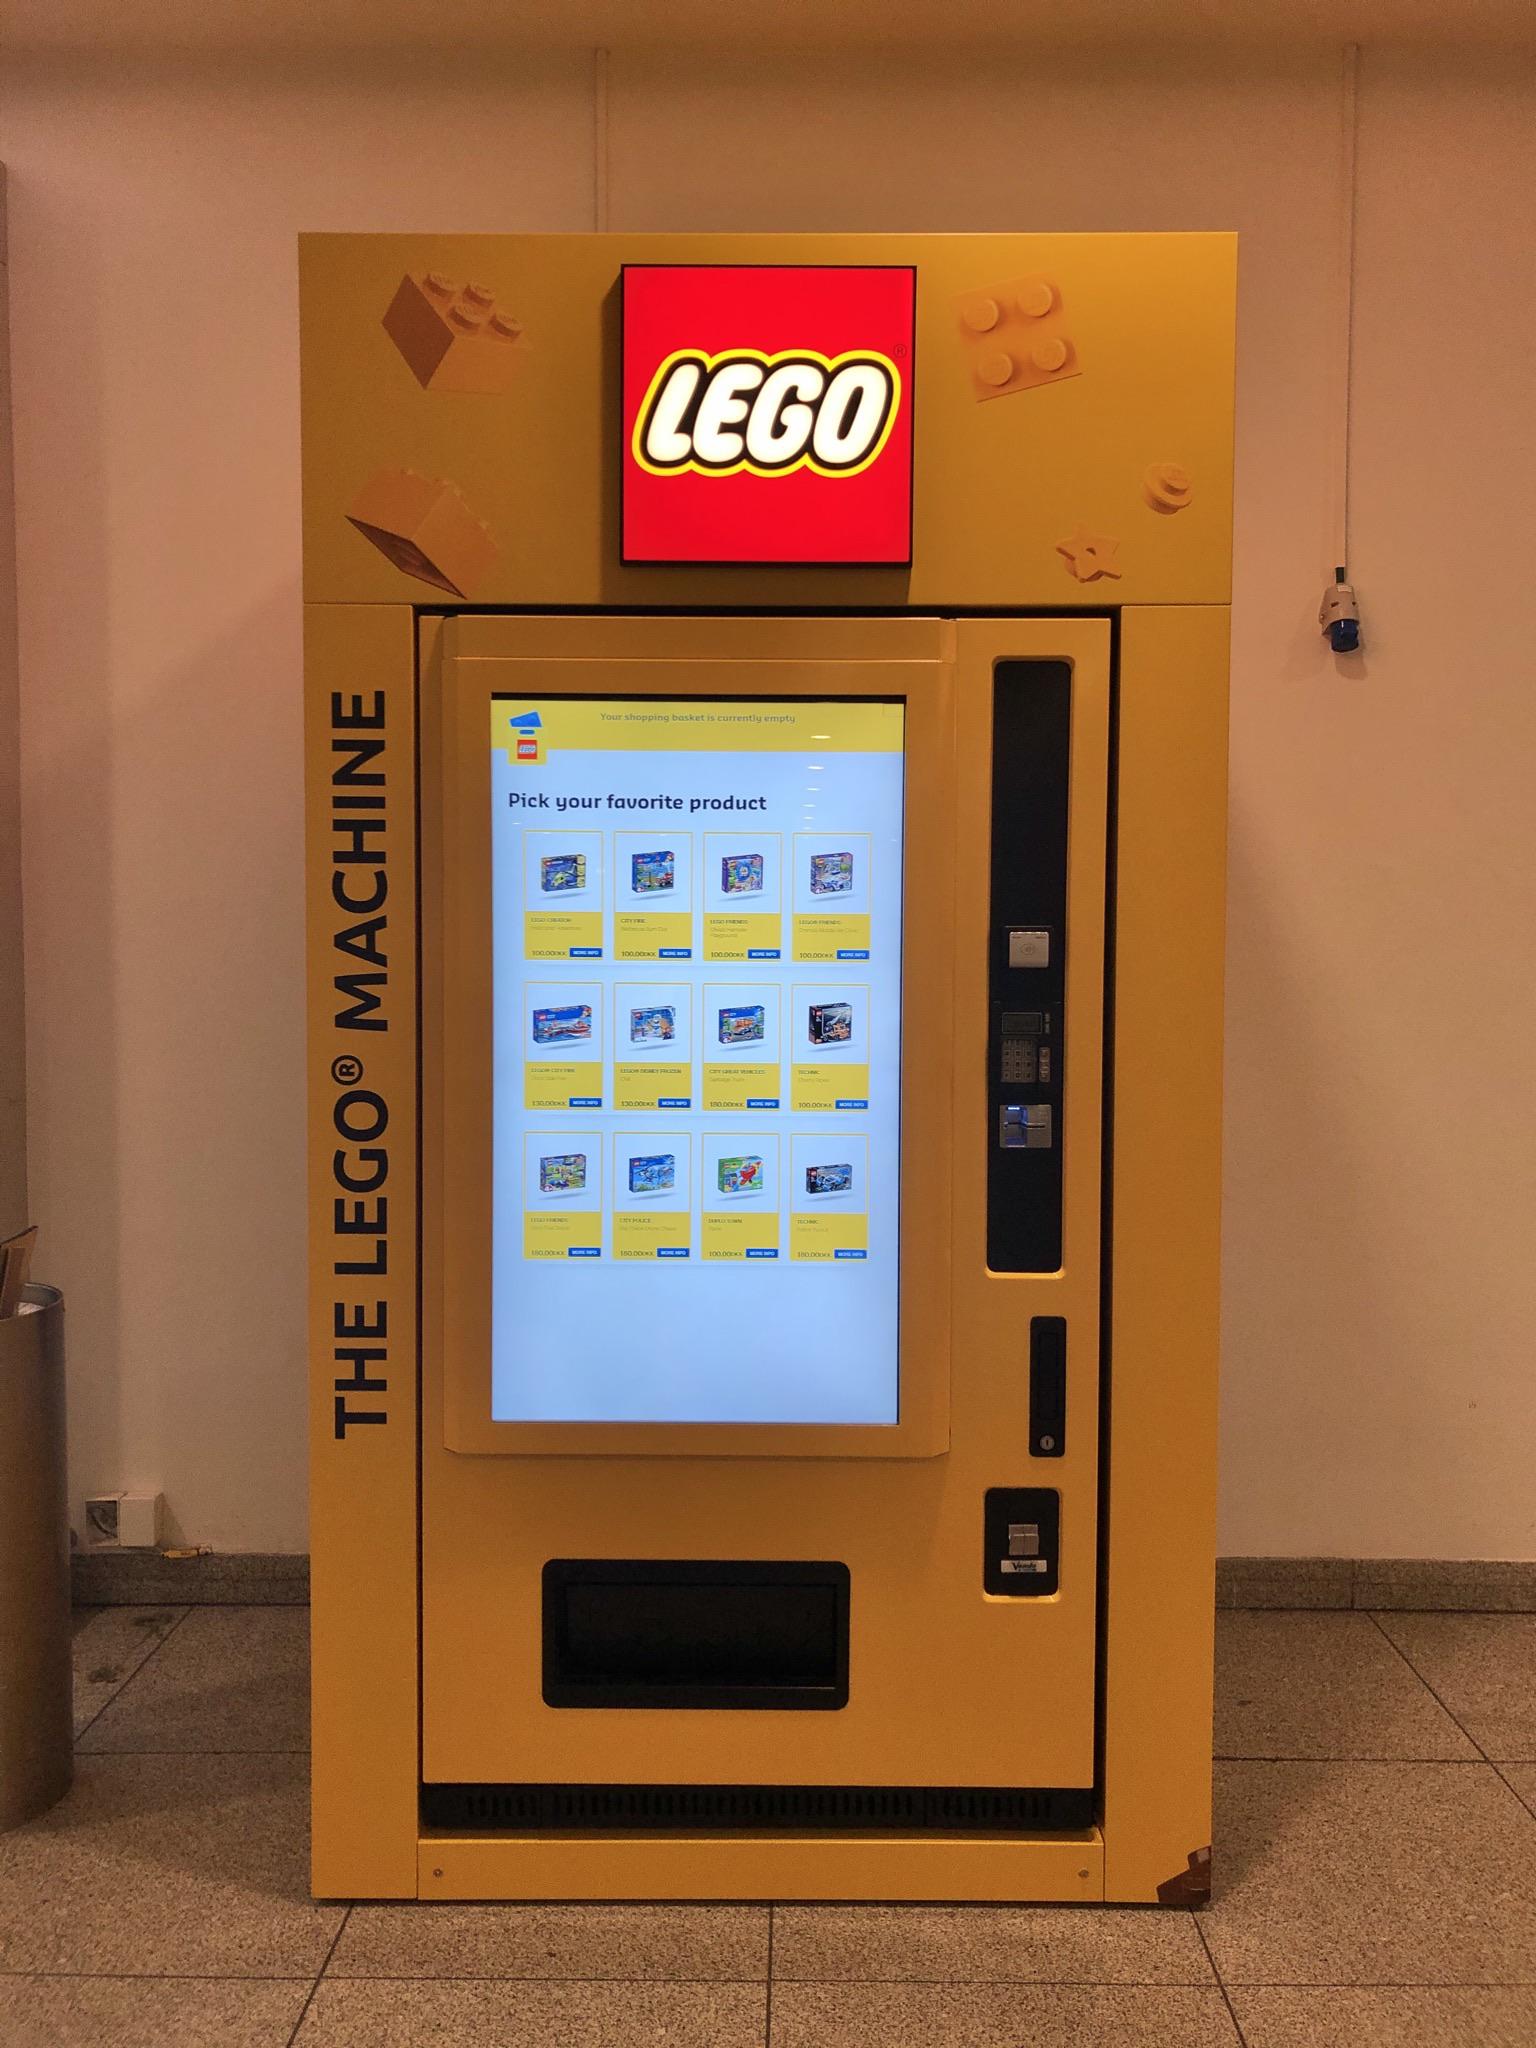 There+is+a+LEGO+vending+machine+in+the+Copenhagen+airport.